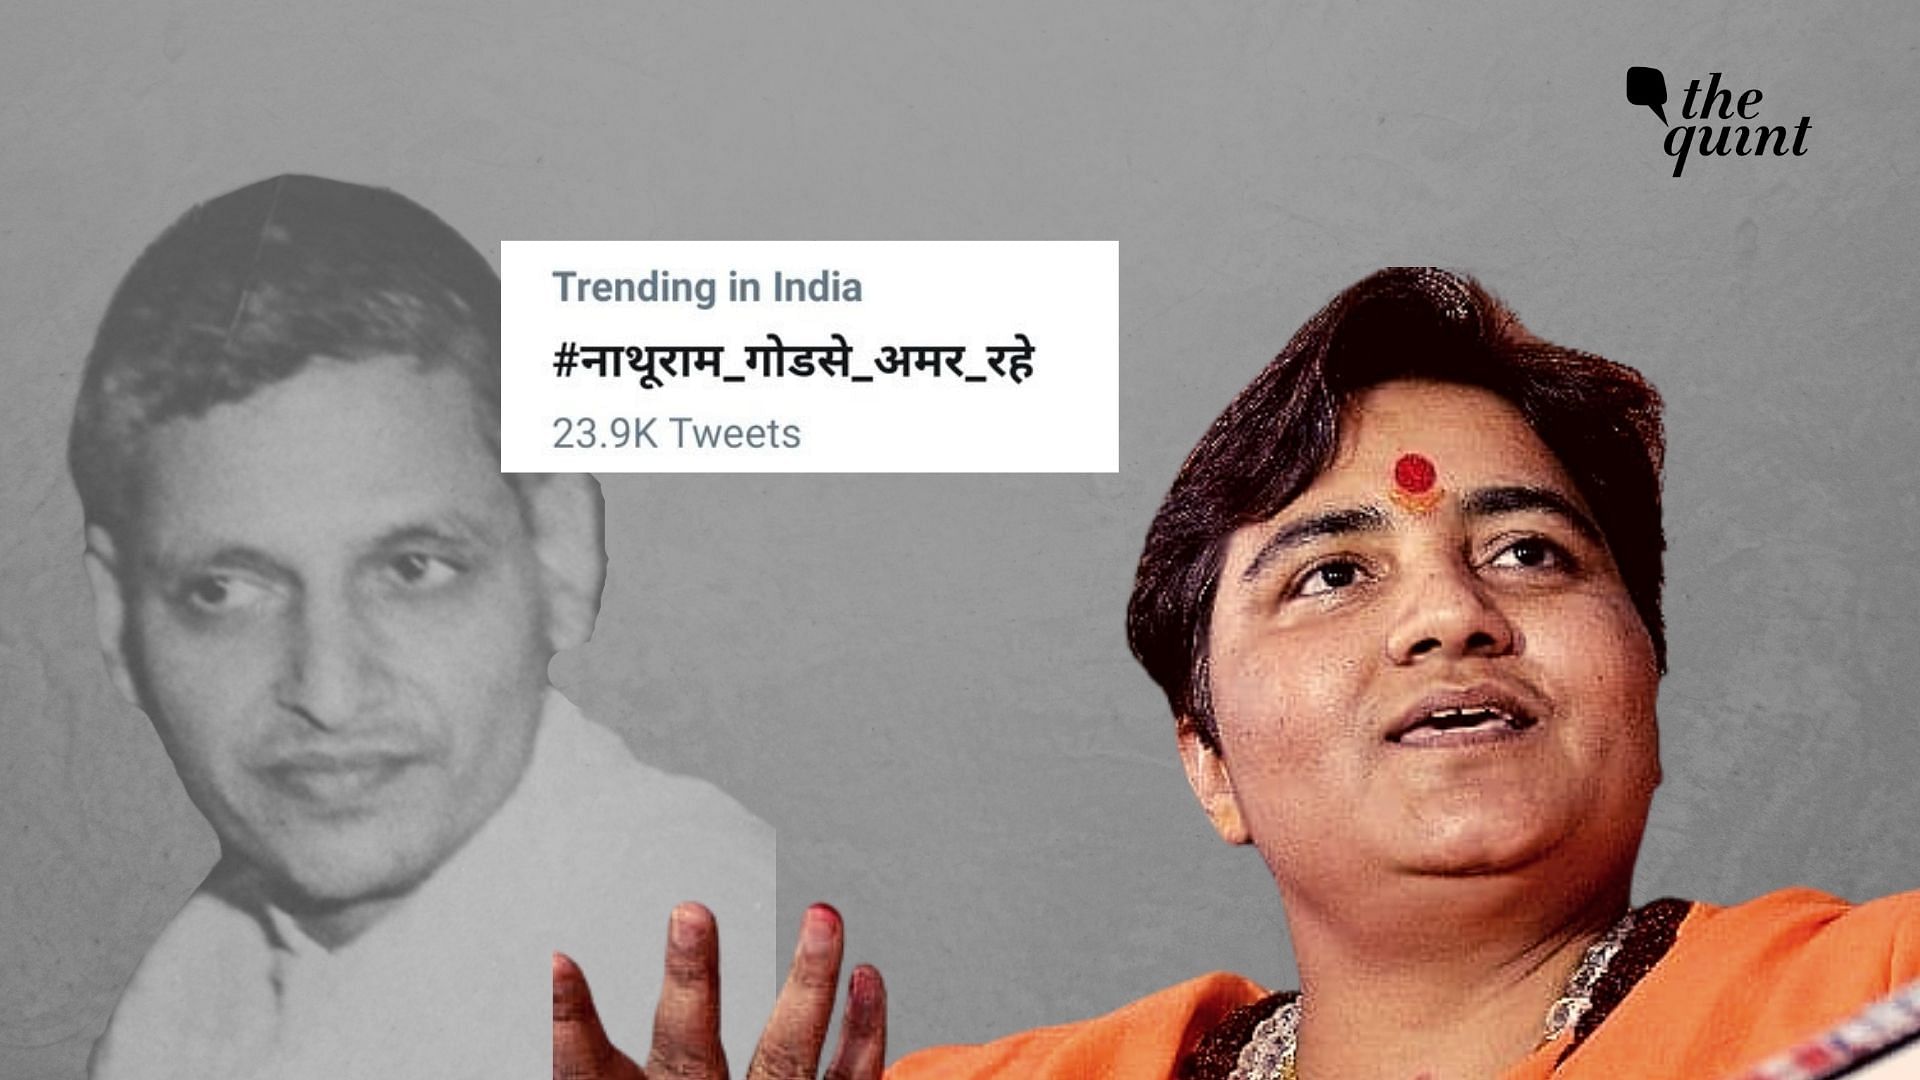 On Nathuram Godse’s death anniversary, two hashtags hailing the man who killed Gandhi made it to the top trends in Twitter.